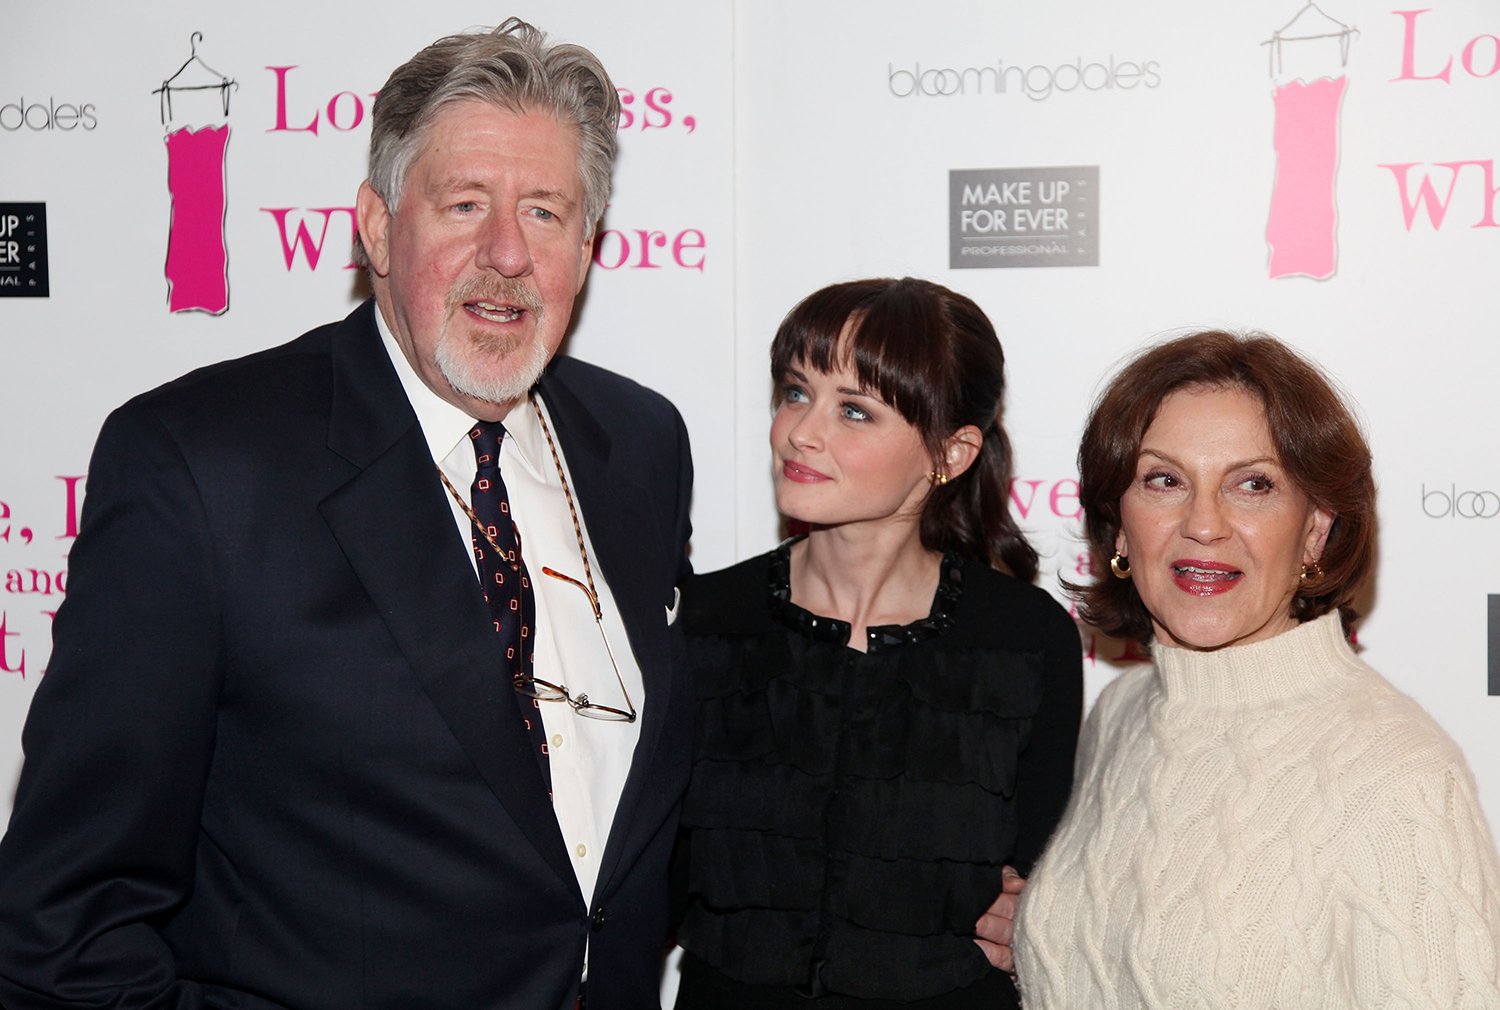 Edward Herrmann, Alexis Bledel, and Kelly Bishop at the 'Love, Loss, and What I Wore' 500th performance celebration